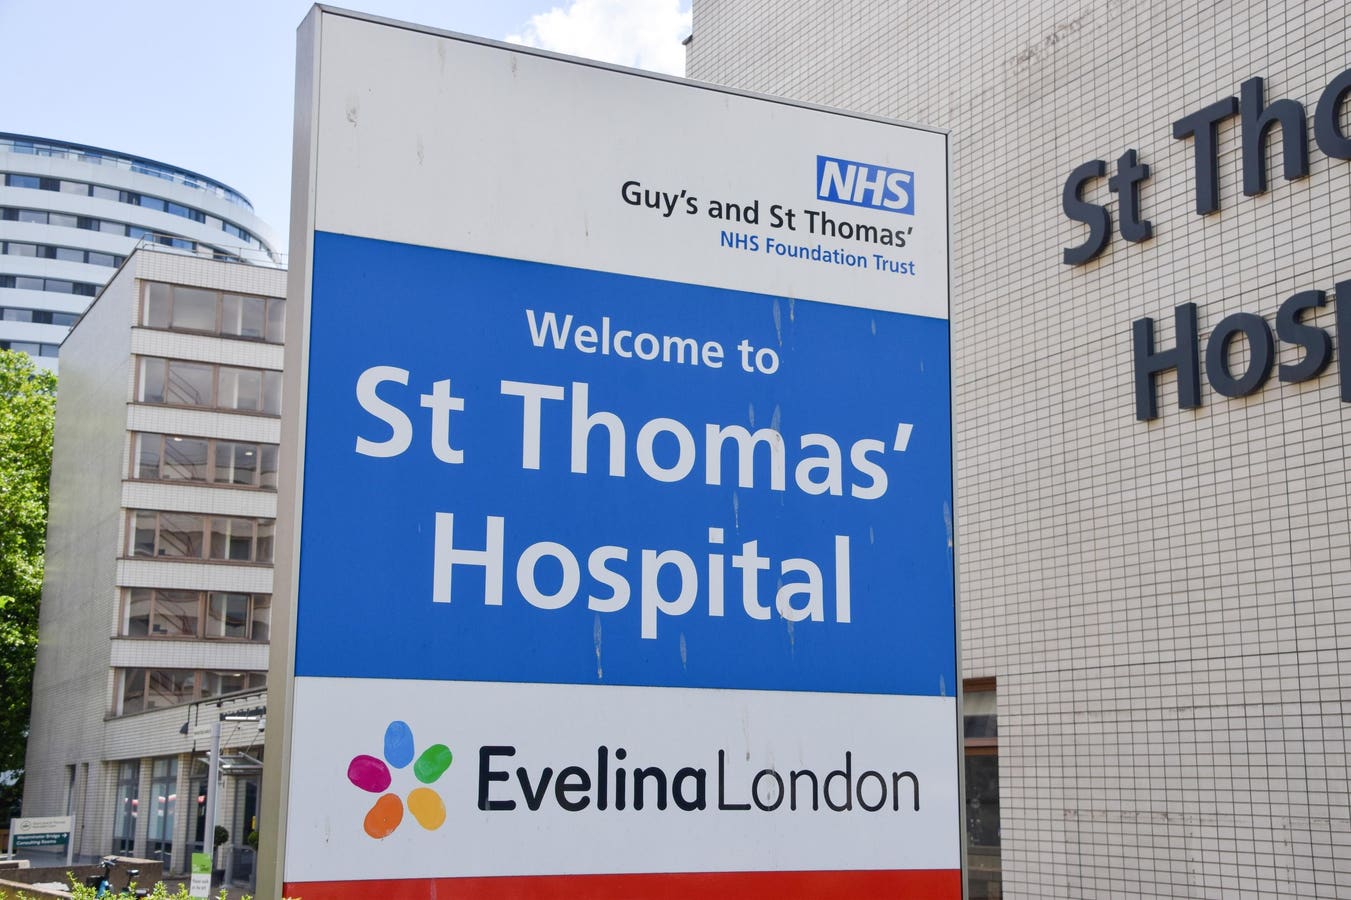 Hackers Publish 400GB Of Data After London Hospital Cyber Attack